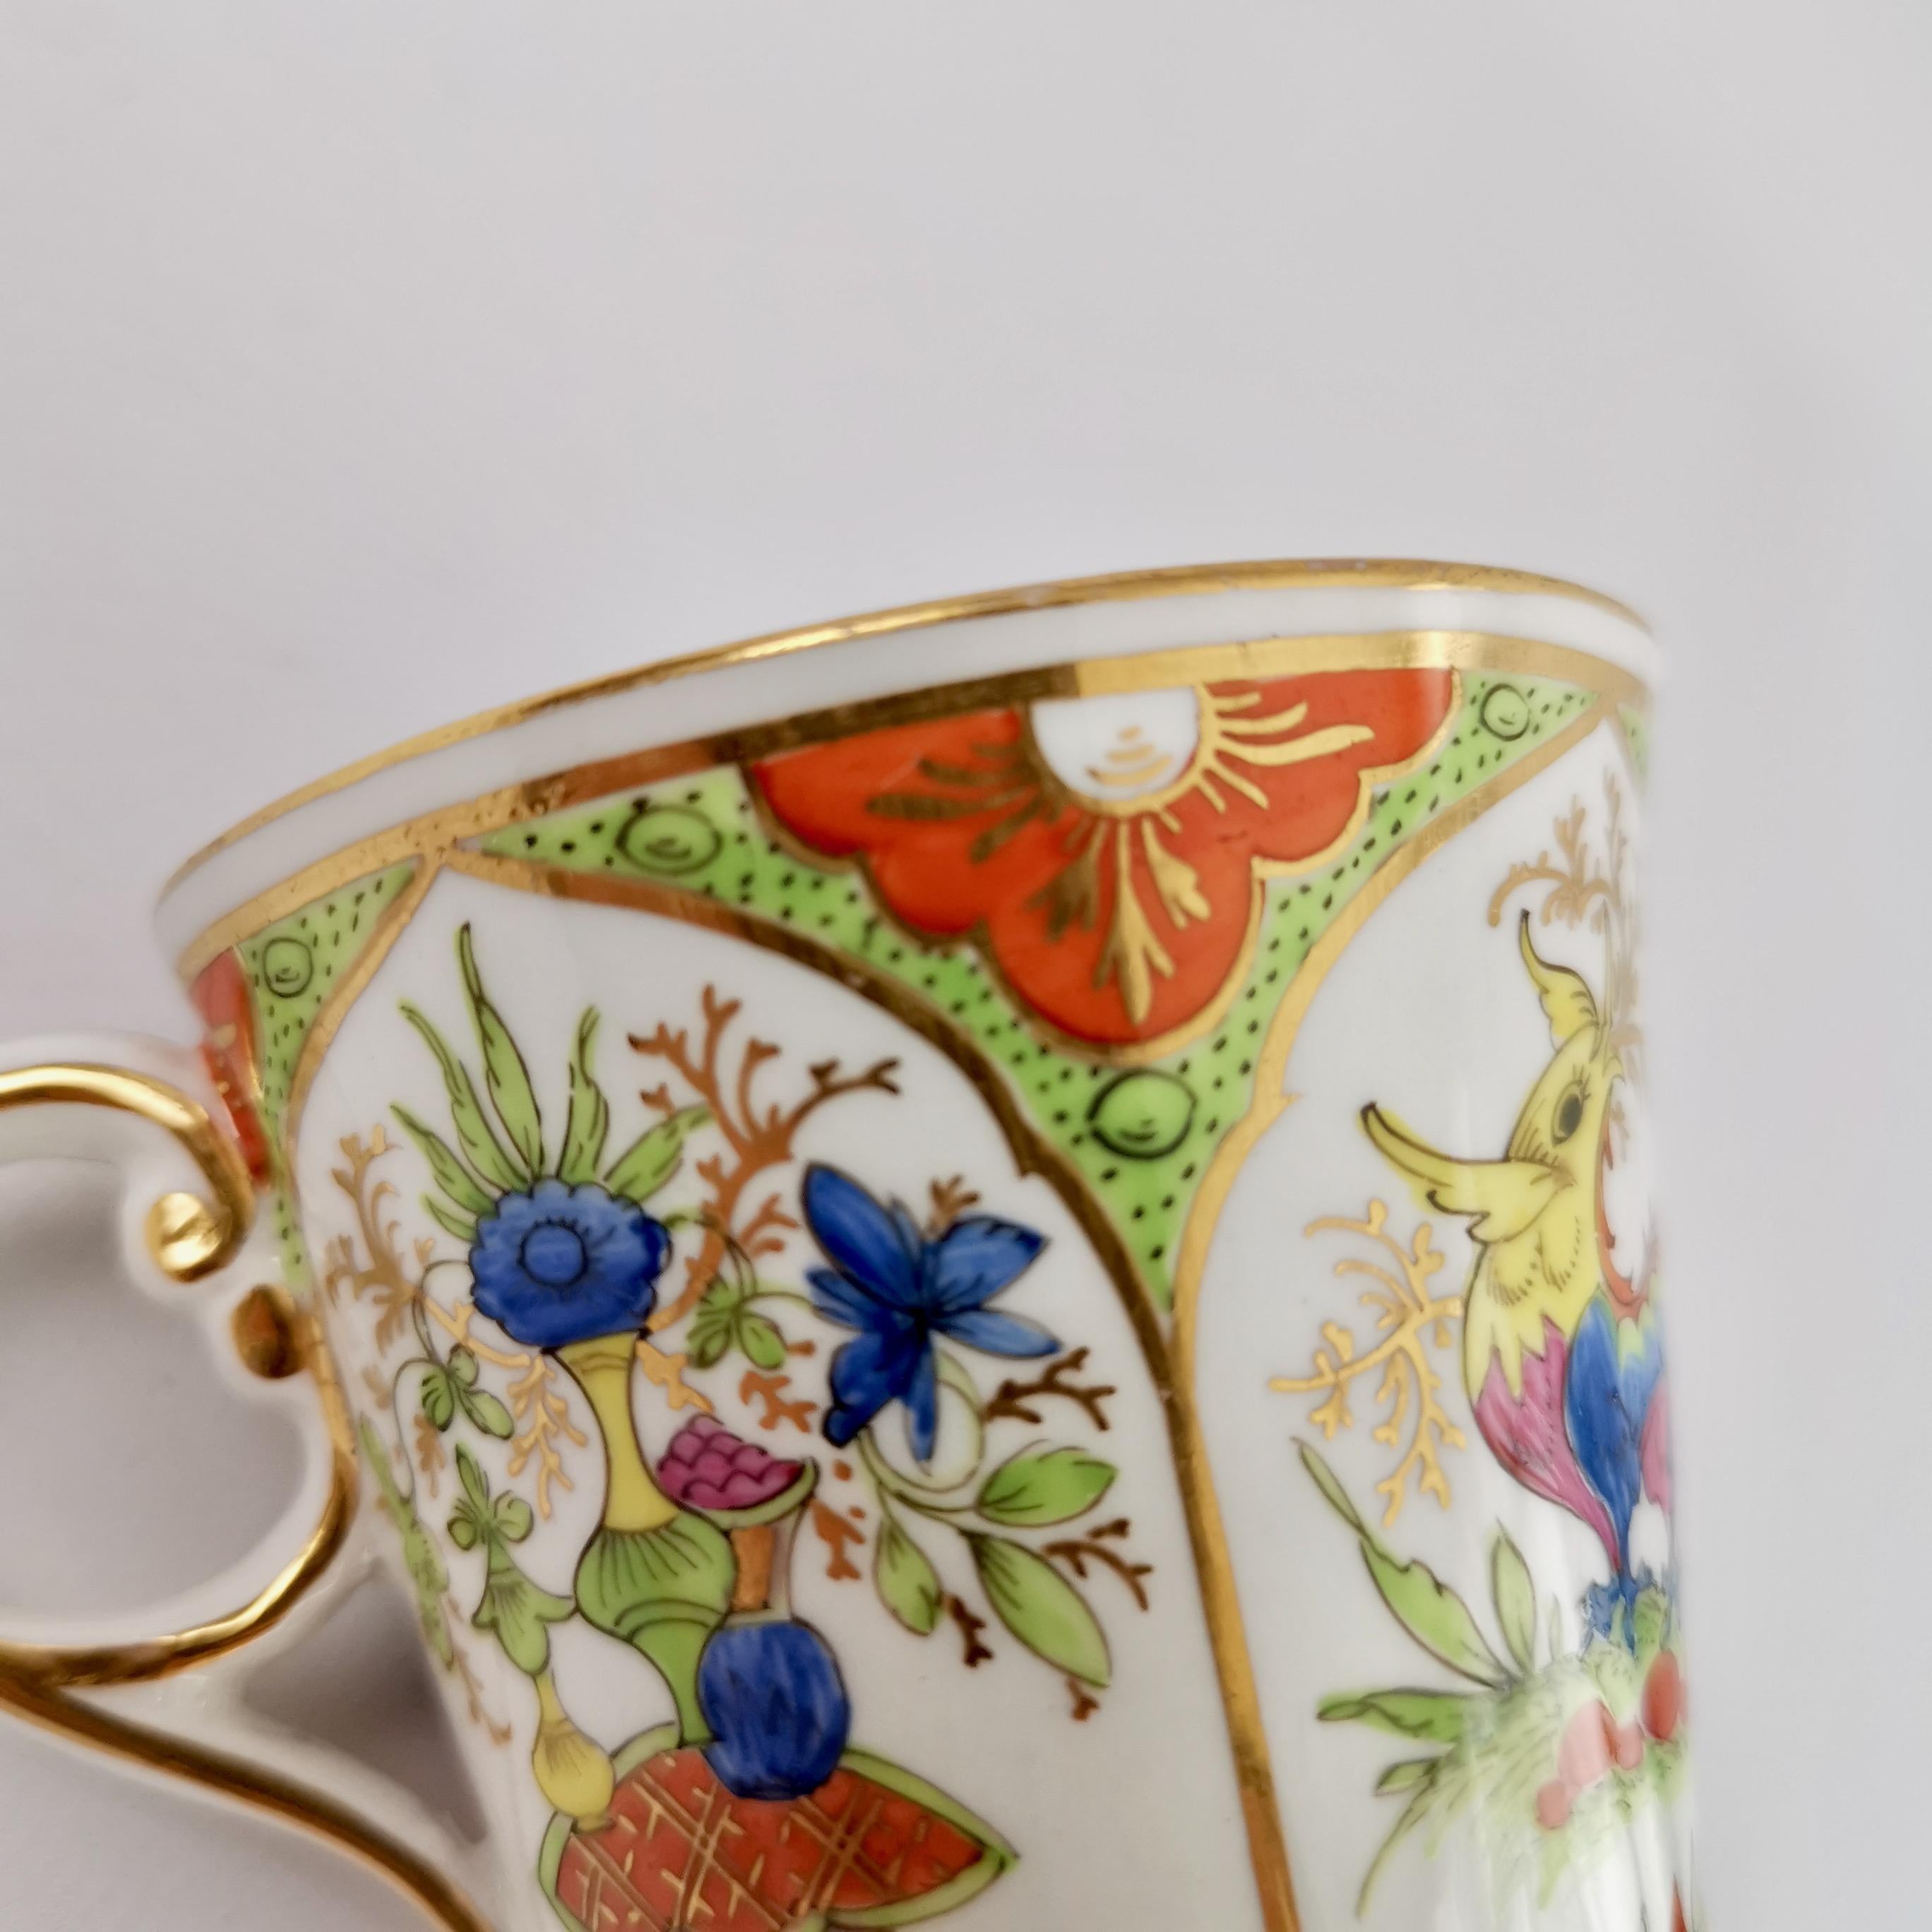 Chamberlain's Worcester Orphaned Porcelain Coffee Cup, Dragons, circa 1810 3